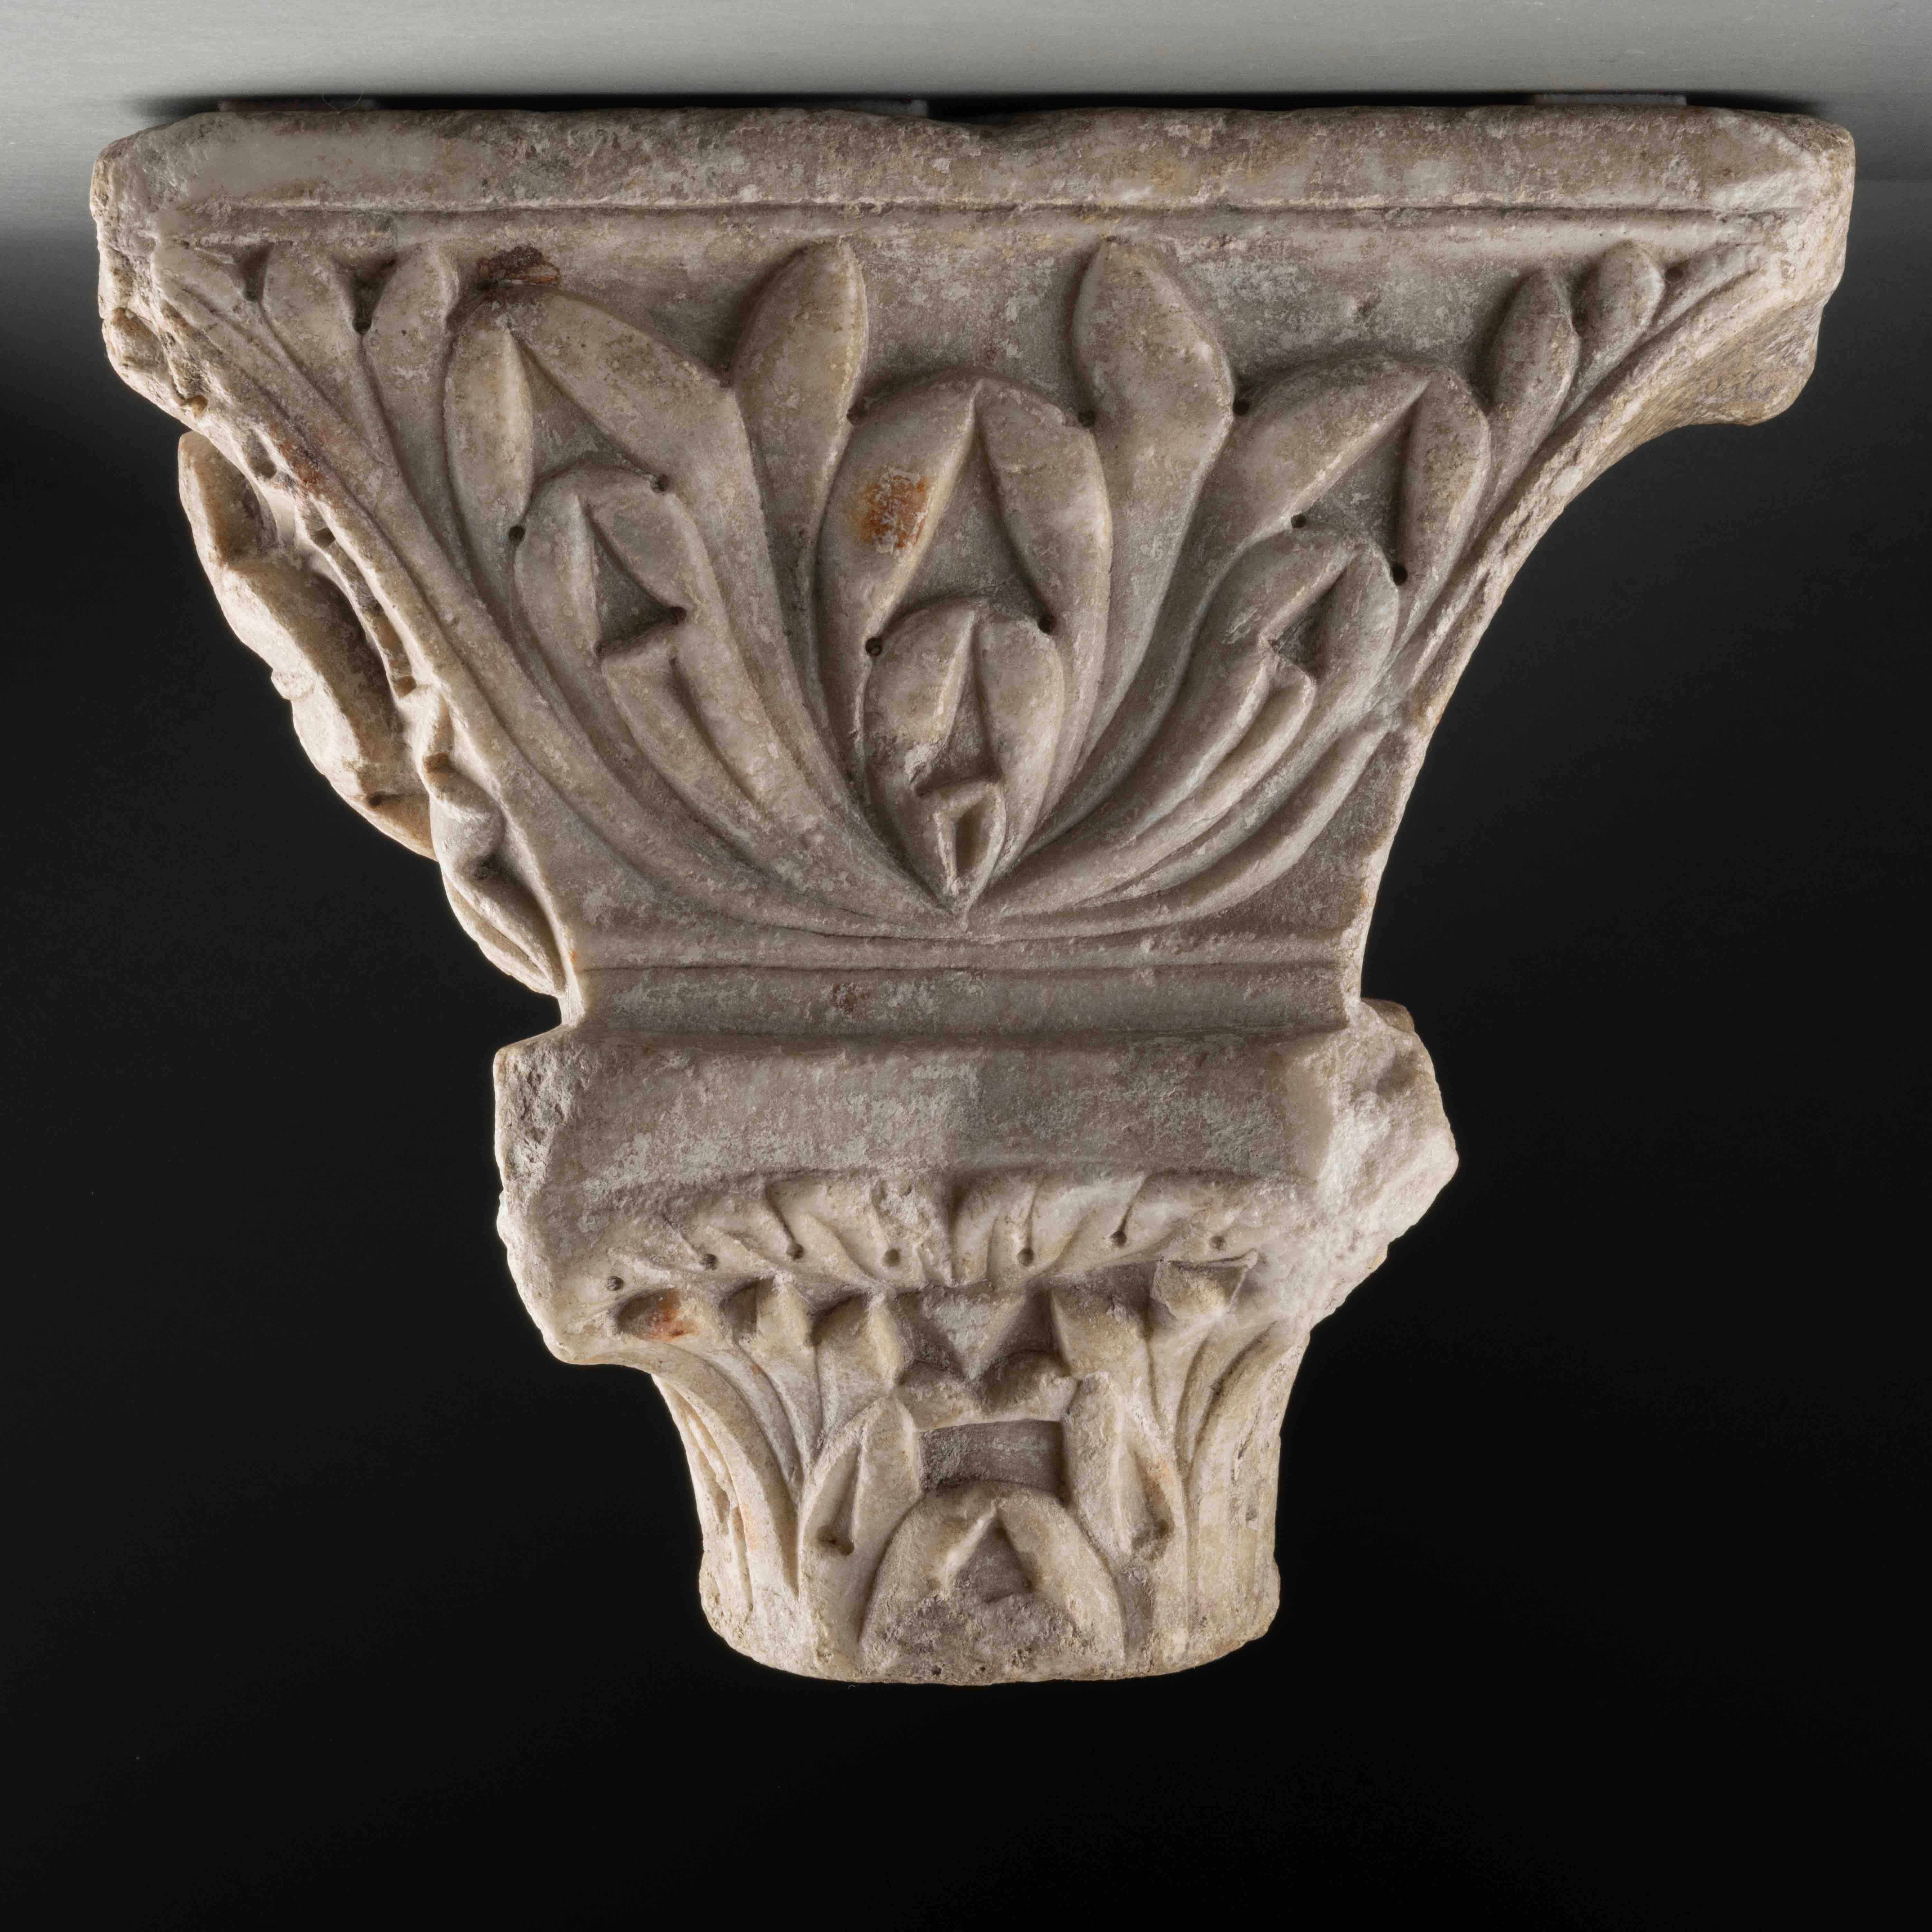 Marble capital carved with acanthus leaves 
Southern Italy, Apulia
13th century
28,5 x 53,5 x 12,5 cm 

This wedge-shape capital decorated with acanthus leaves and roses is characterized by symmetry, elegance and restraint. 

The unusual shape of